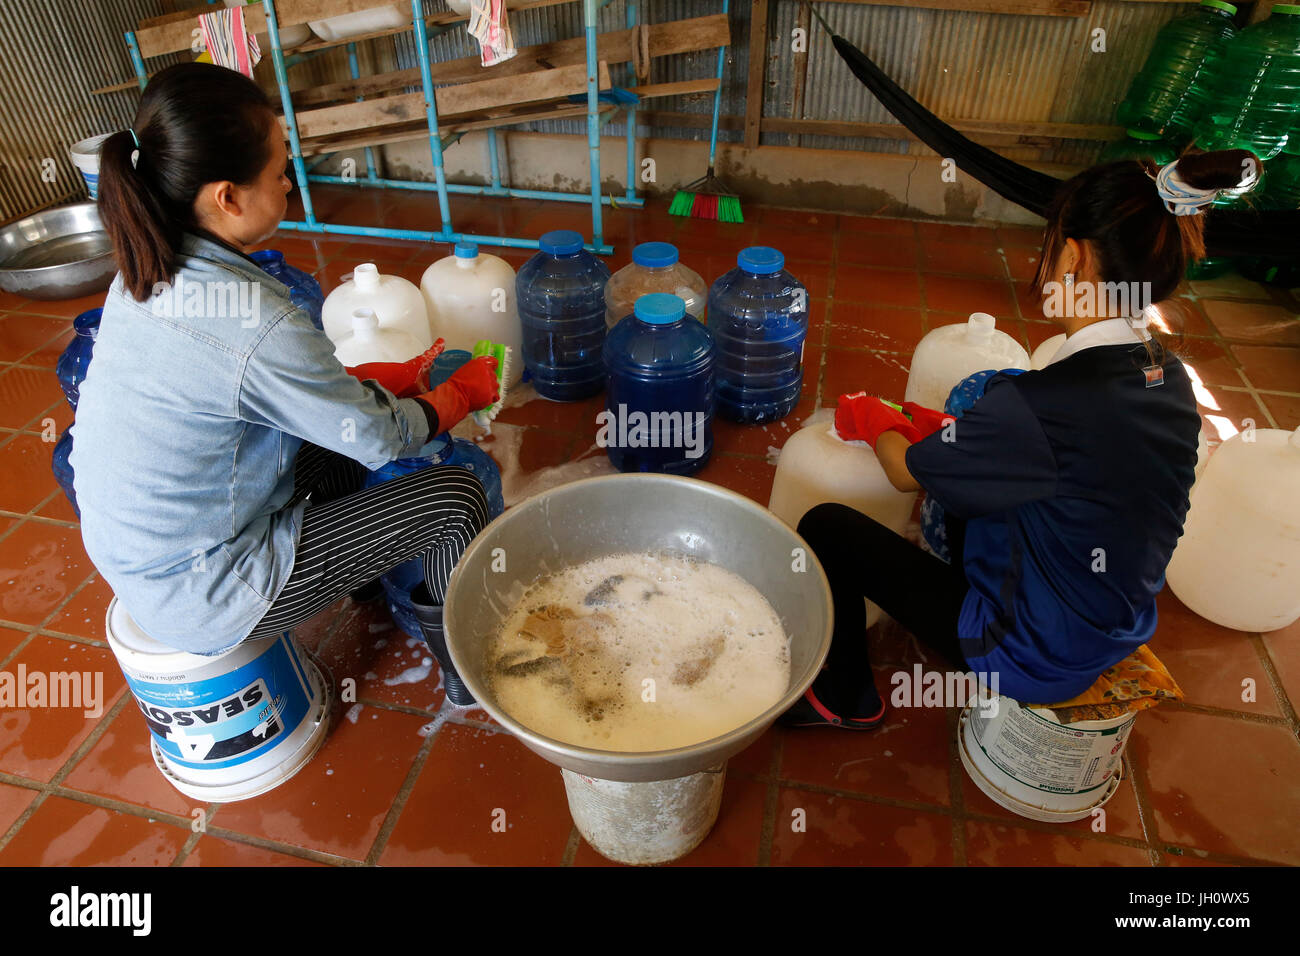 1001 Fountains water business. Employees cleaning demijohns. Cambodia. Stock Photo